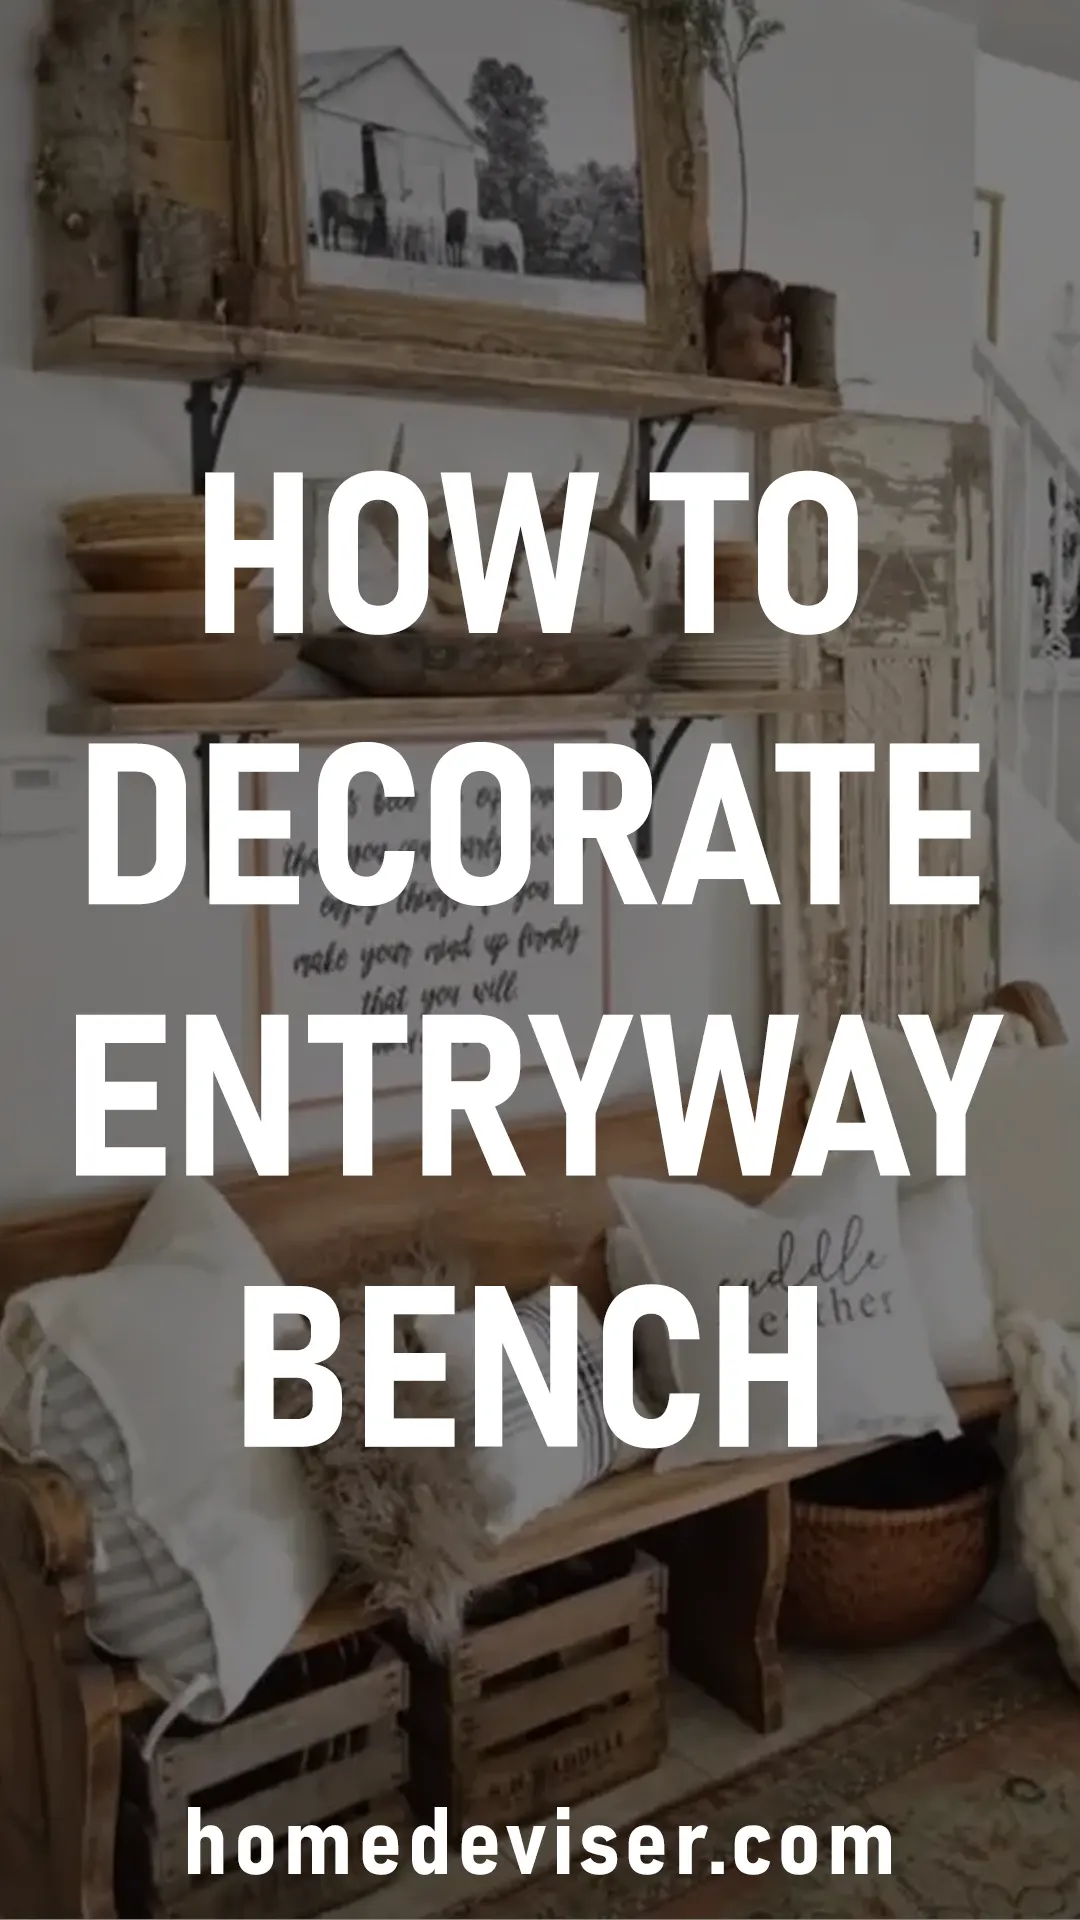 How to Decorate Entryway Bench